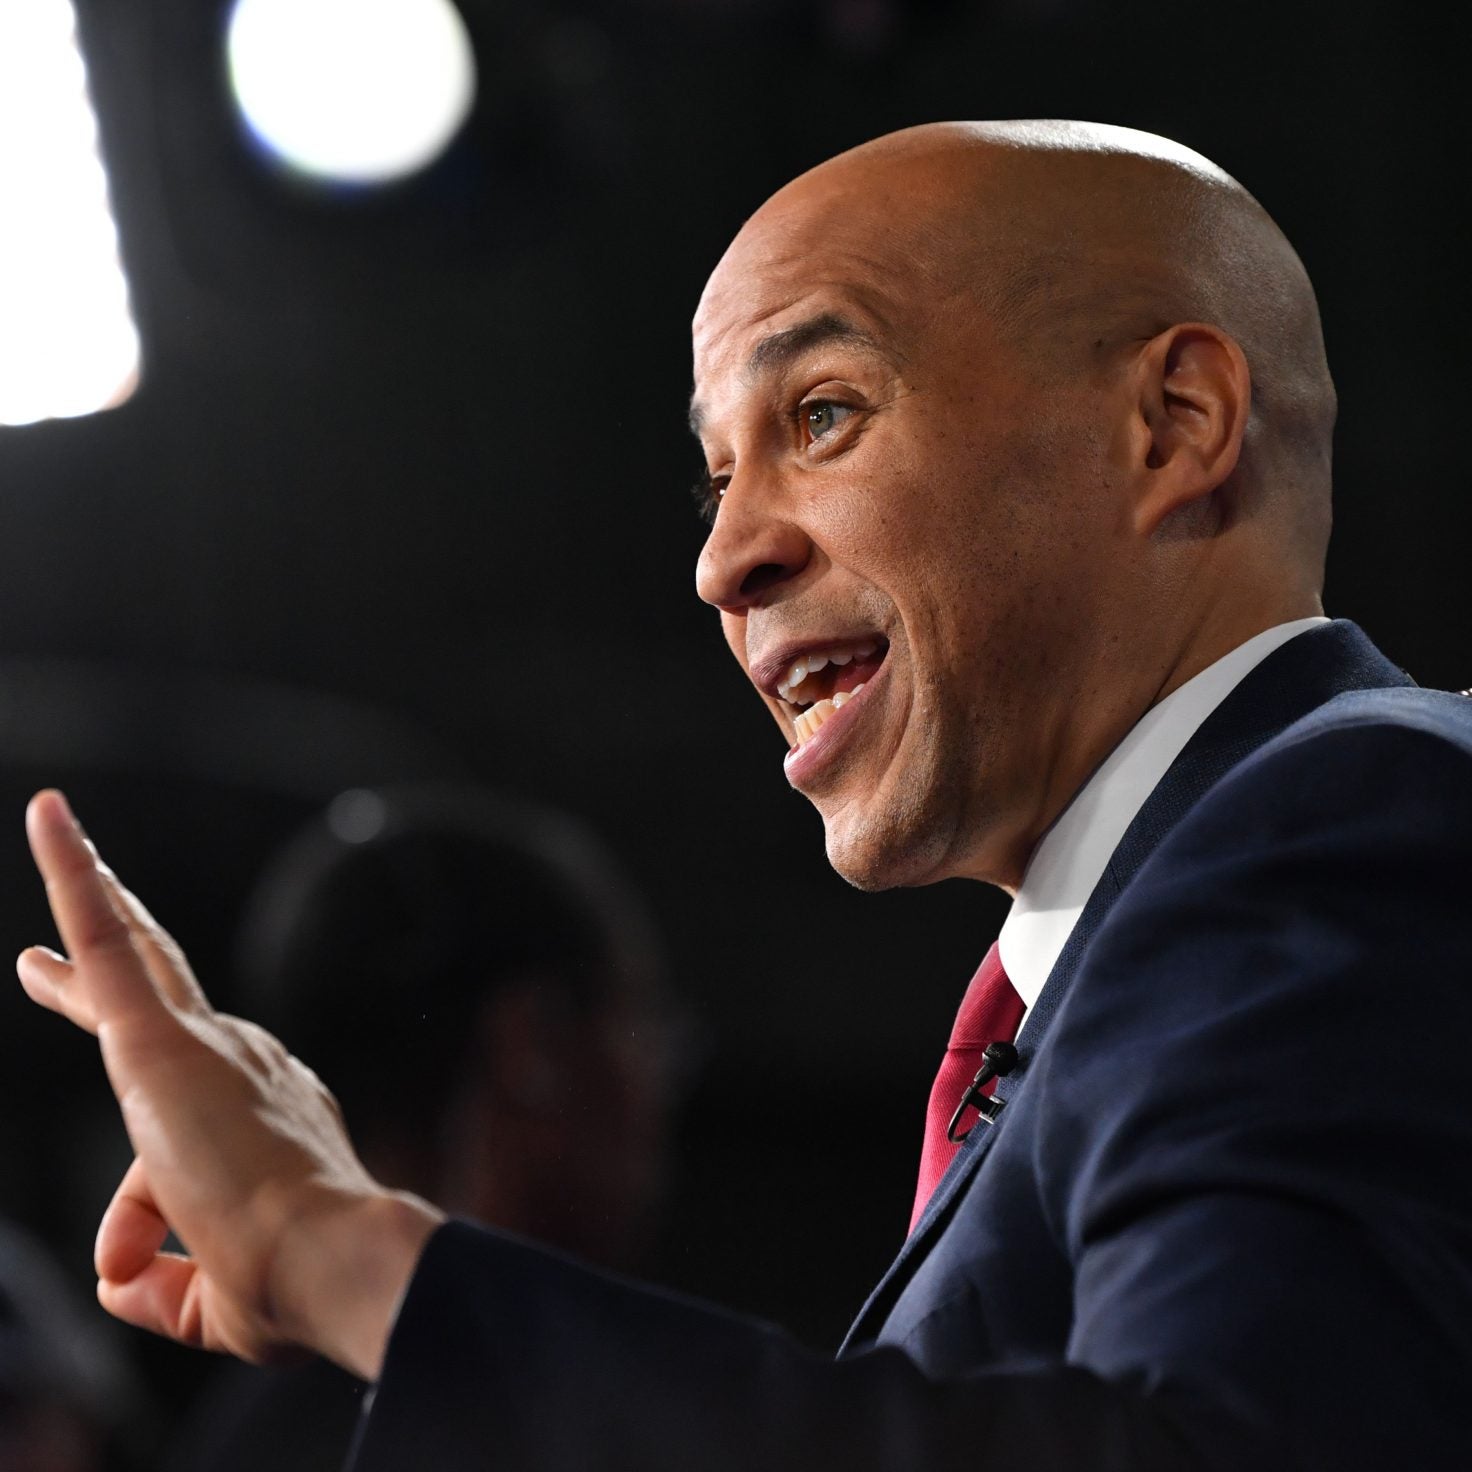 Cory Booker Fails To Qualify For Next Democratic Debate